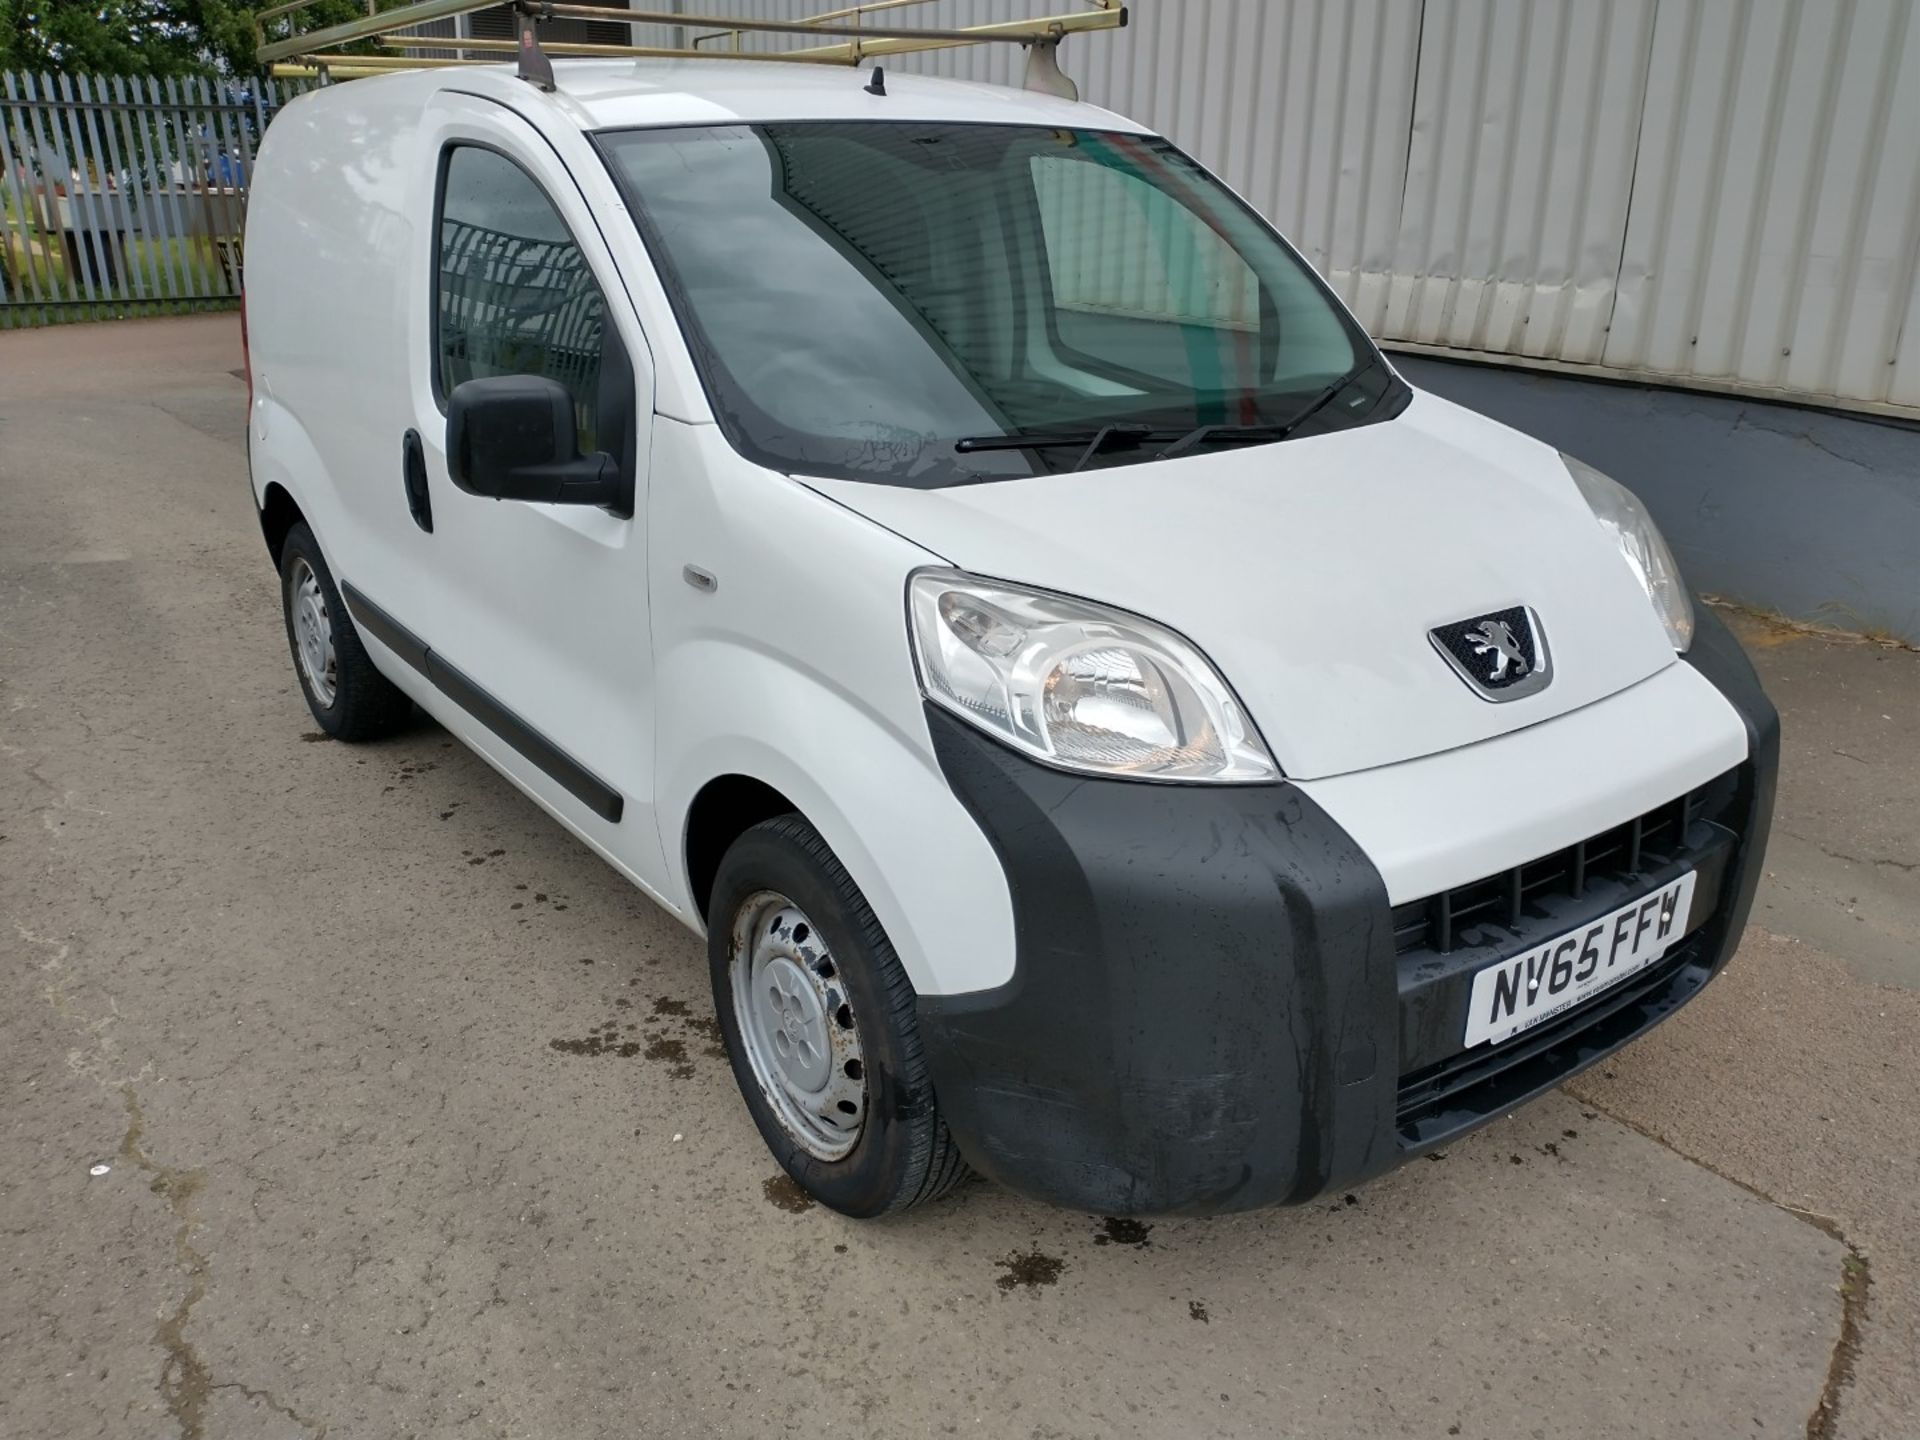 2015 Peugeot Bipper S Hdi White Panel - CL505 - Ref: VVS031 - Location: Corby, Northamptonshire106,